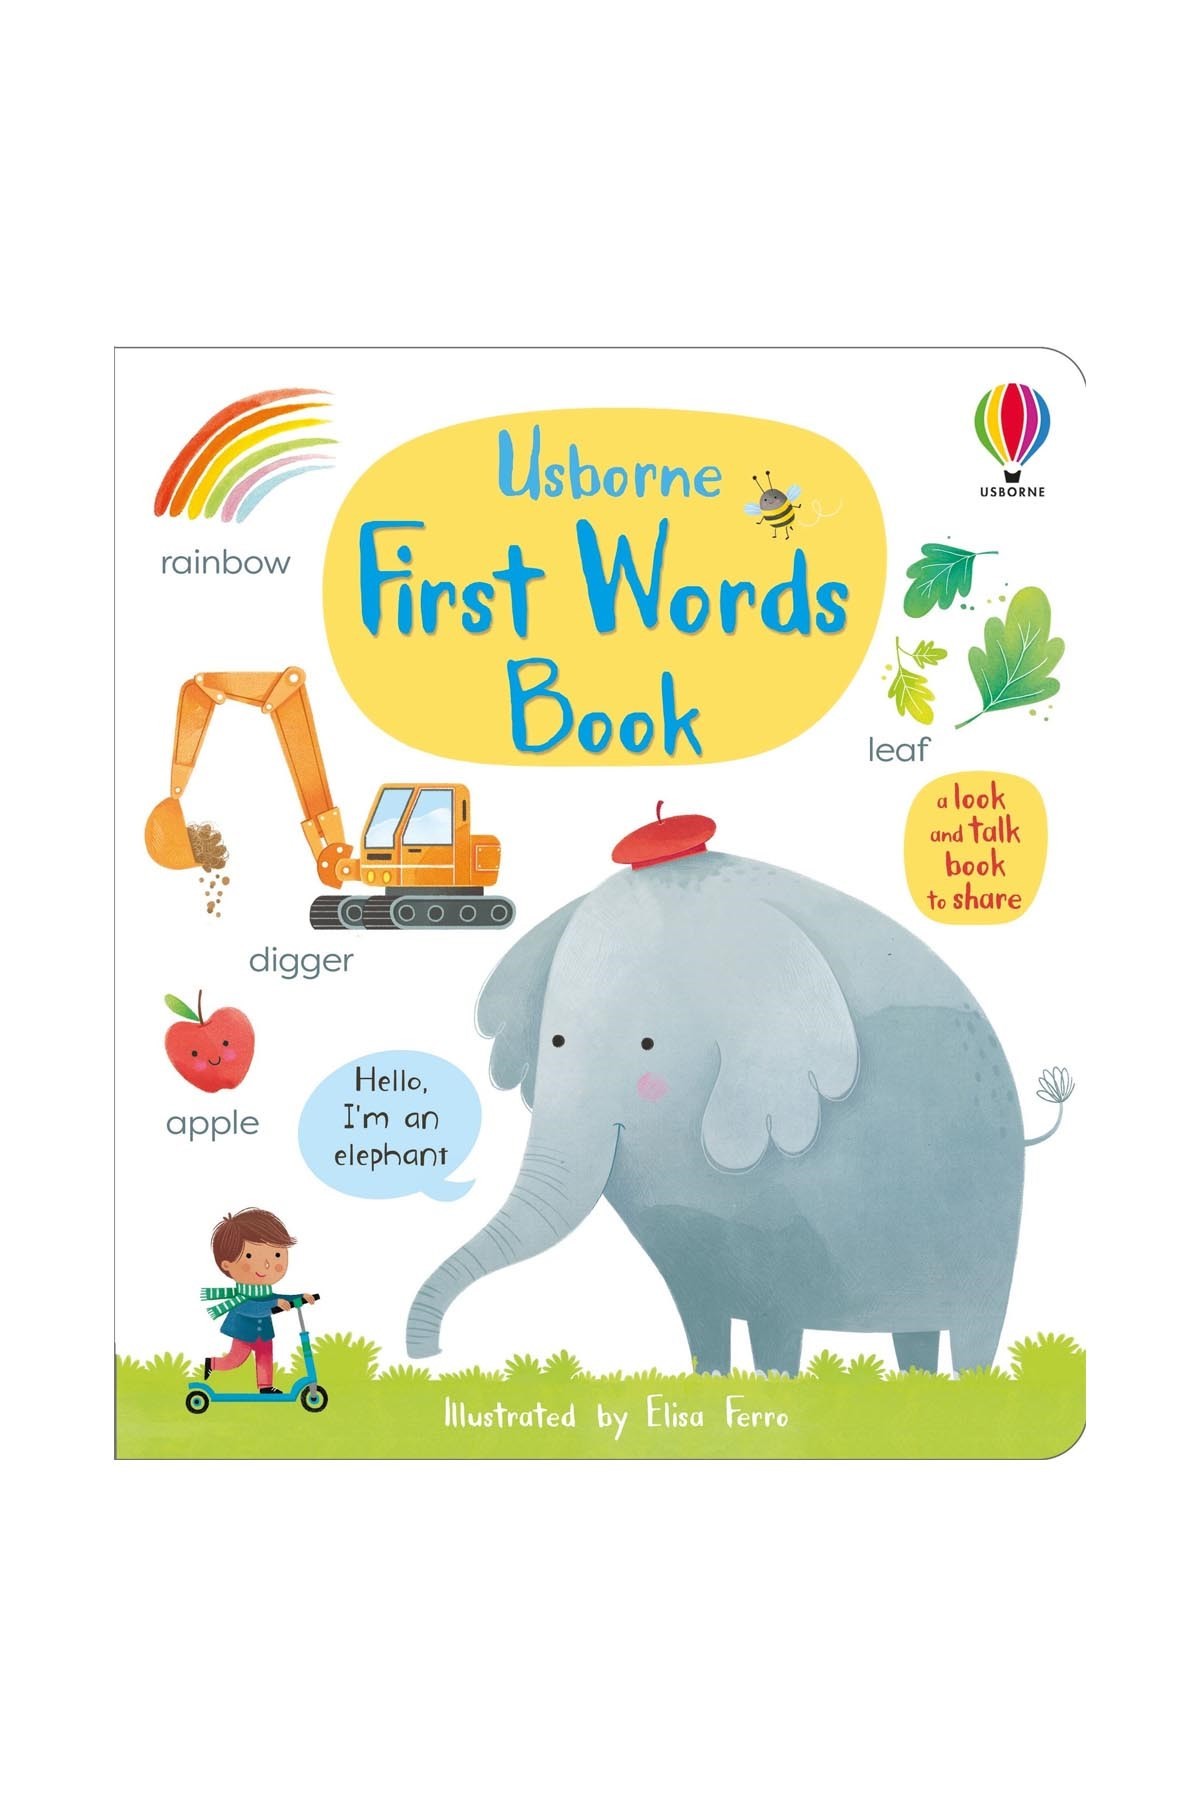 The Usborne First Words Book